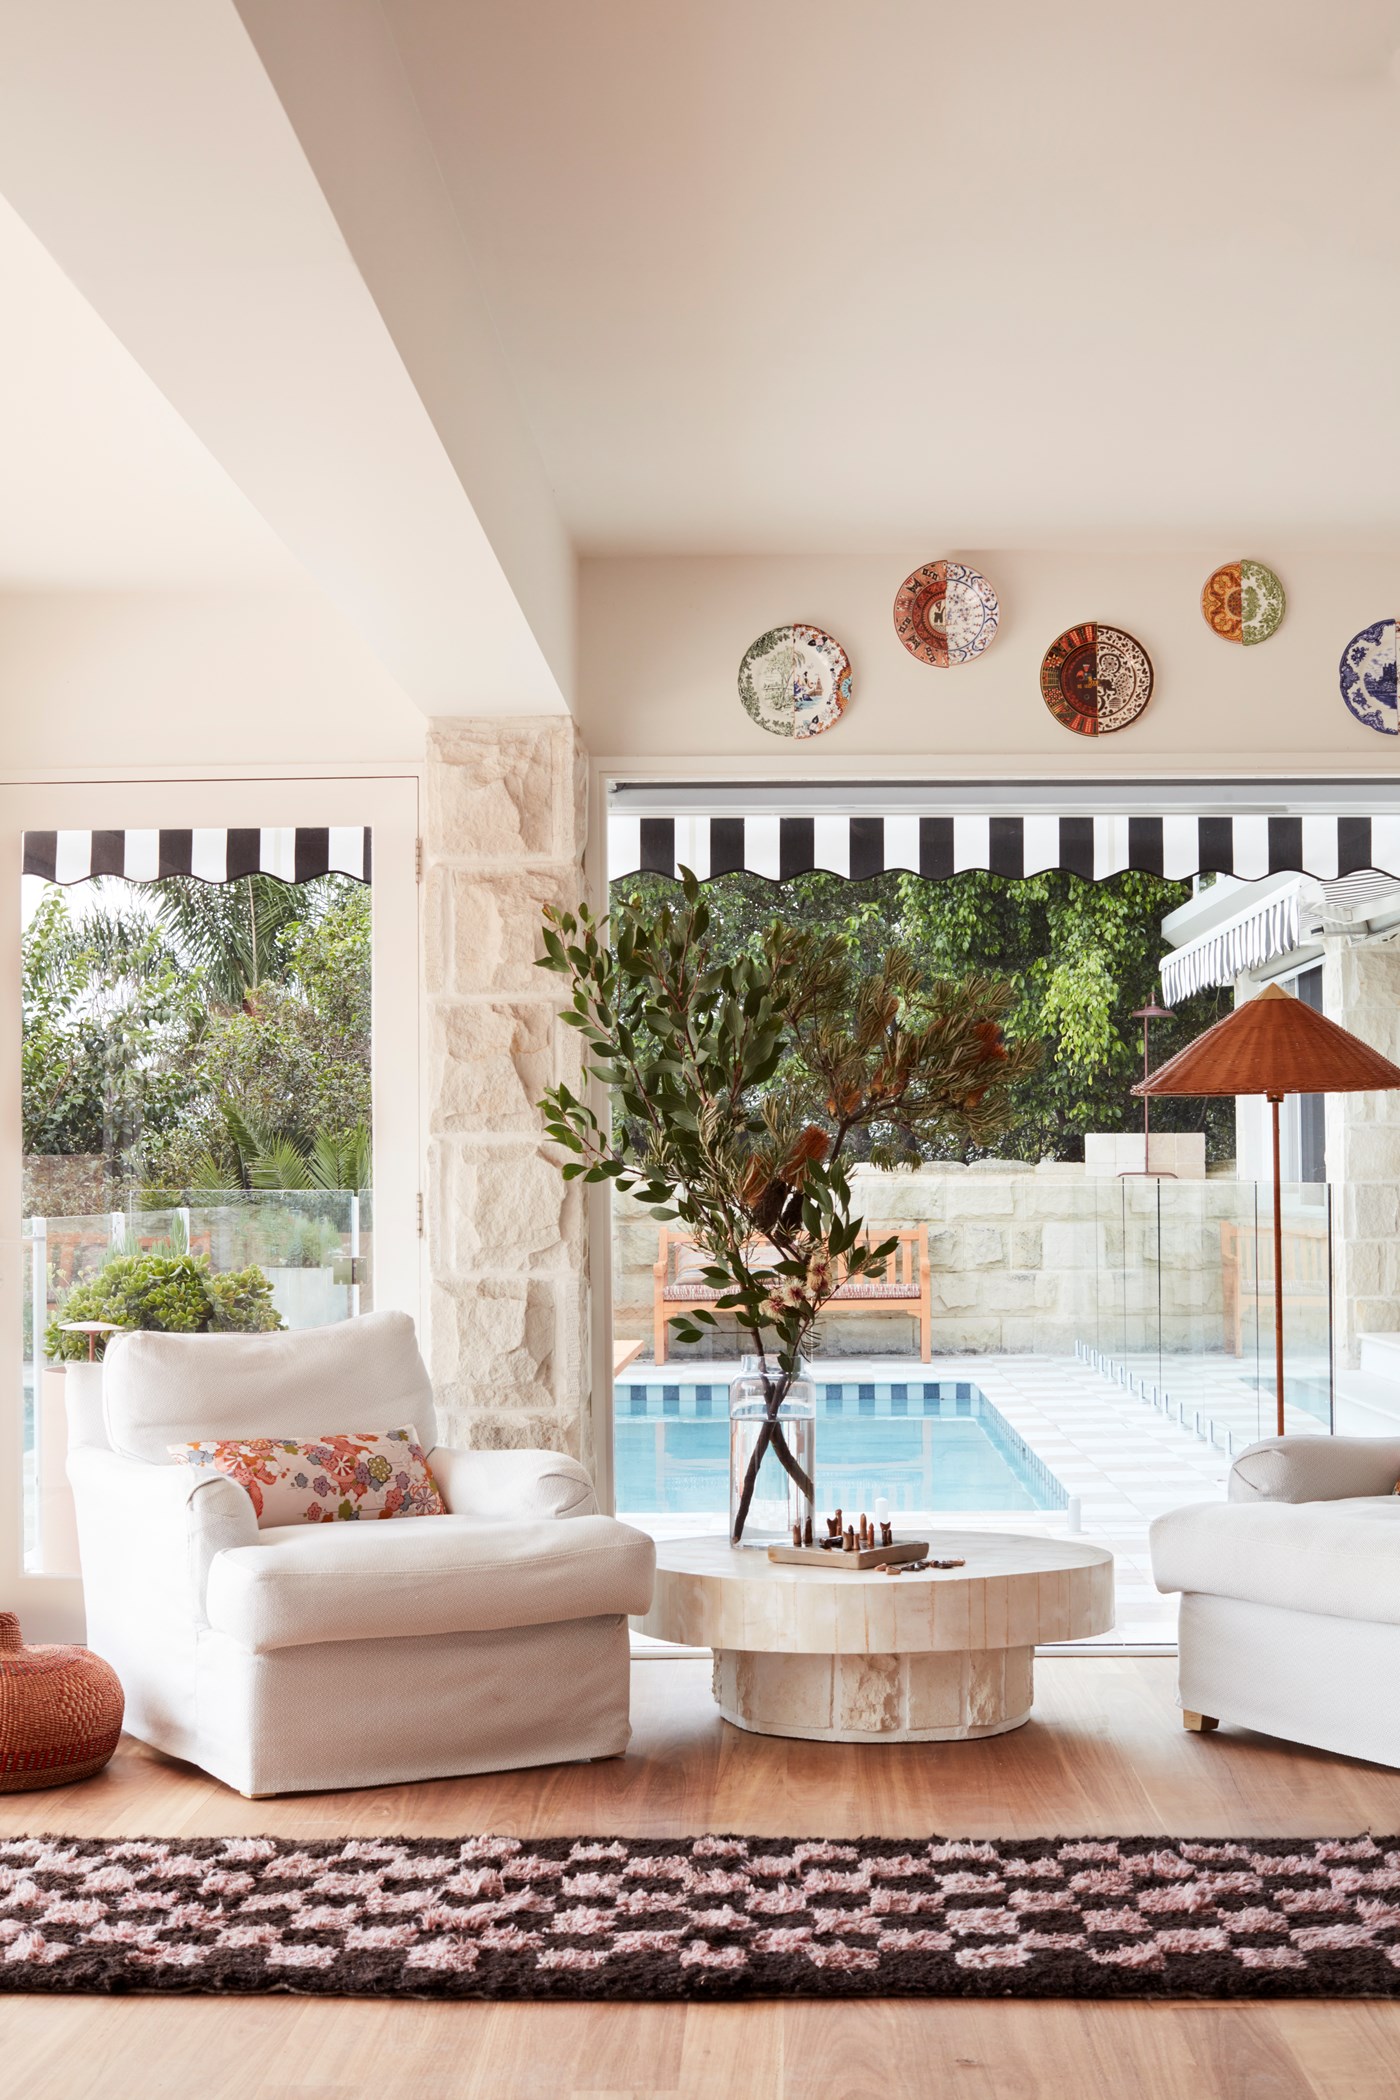 Two sitting chairs in the living room of La Palma are framed by a textured rug and a pool in the background.